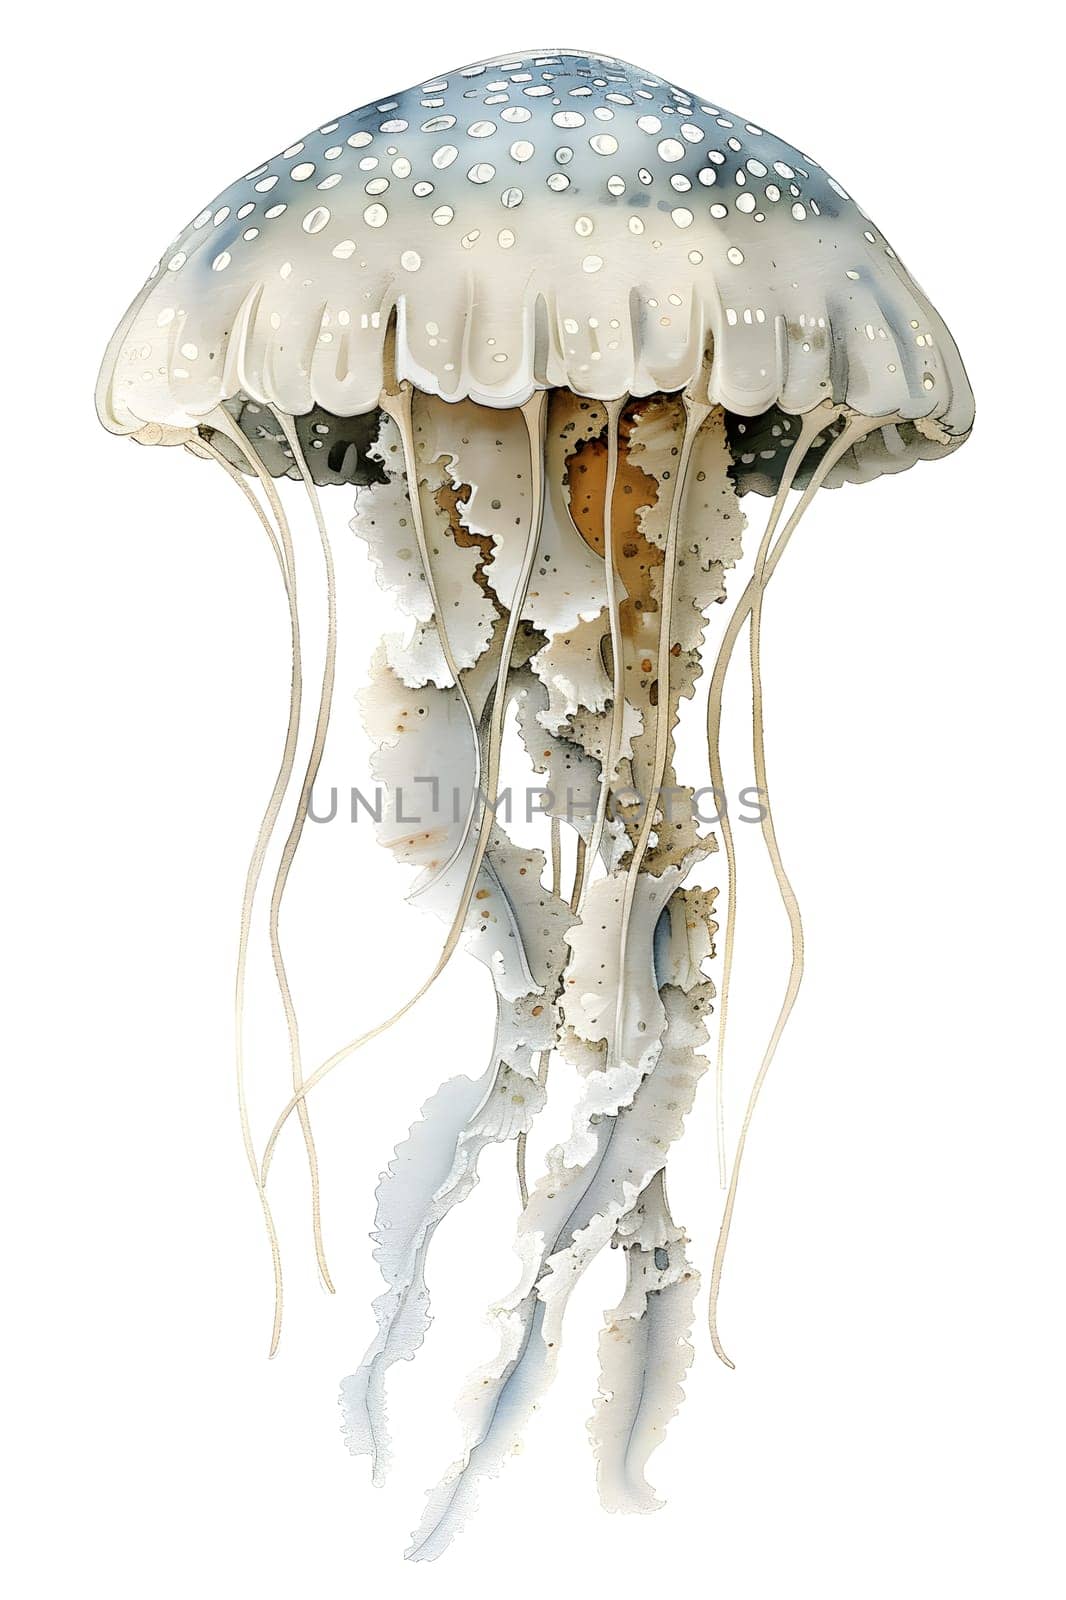 A freezing art piece of a jellyfish with long tentacles made from transparent material, resembling a fashion accessory, on a white background